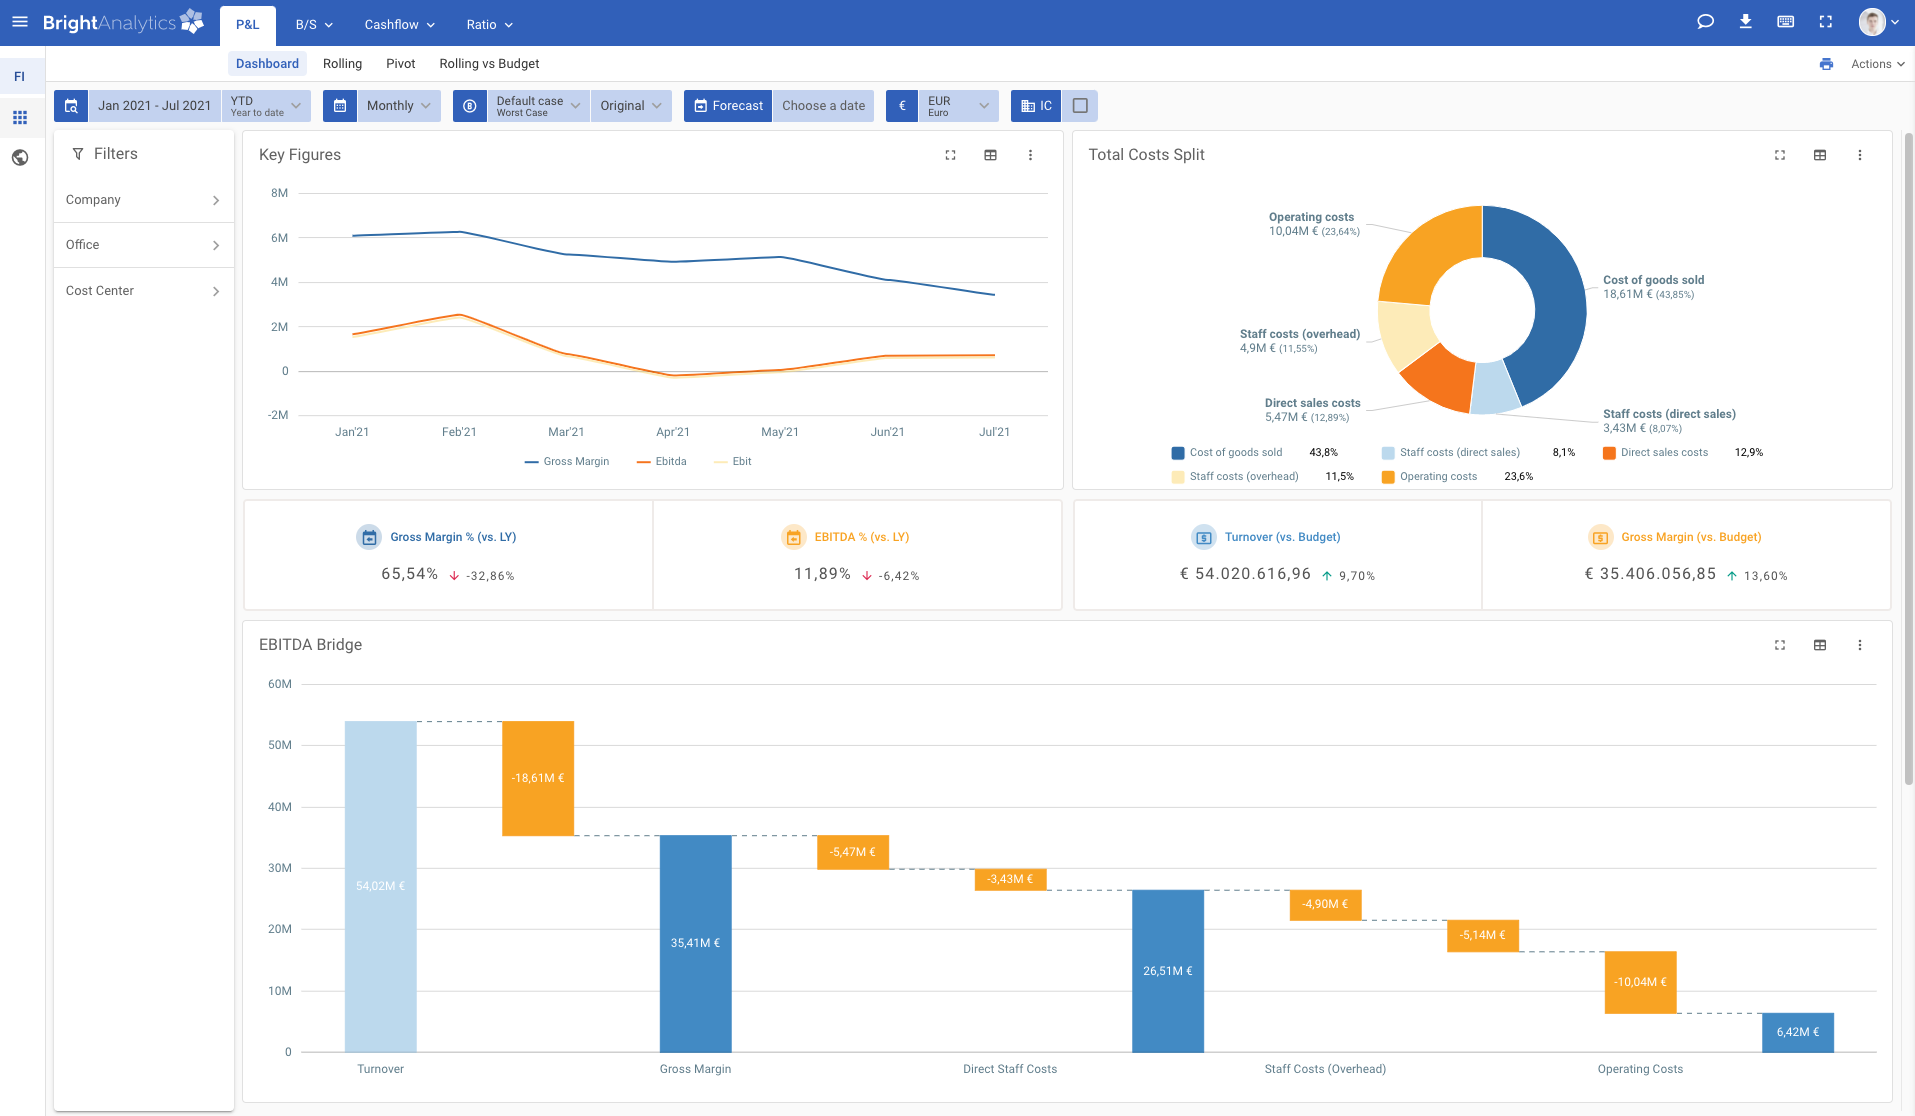 BI Book alternative - The intuitive and user-friendly interface of BrightAnalytics